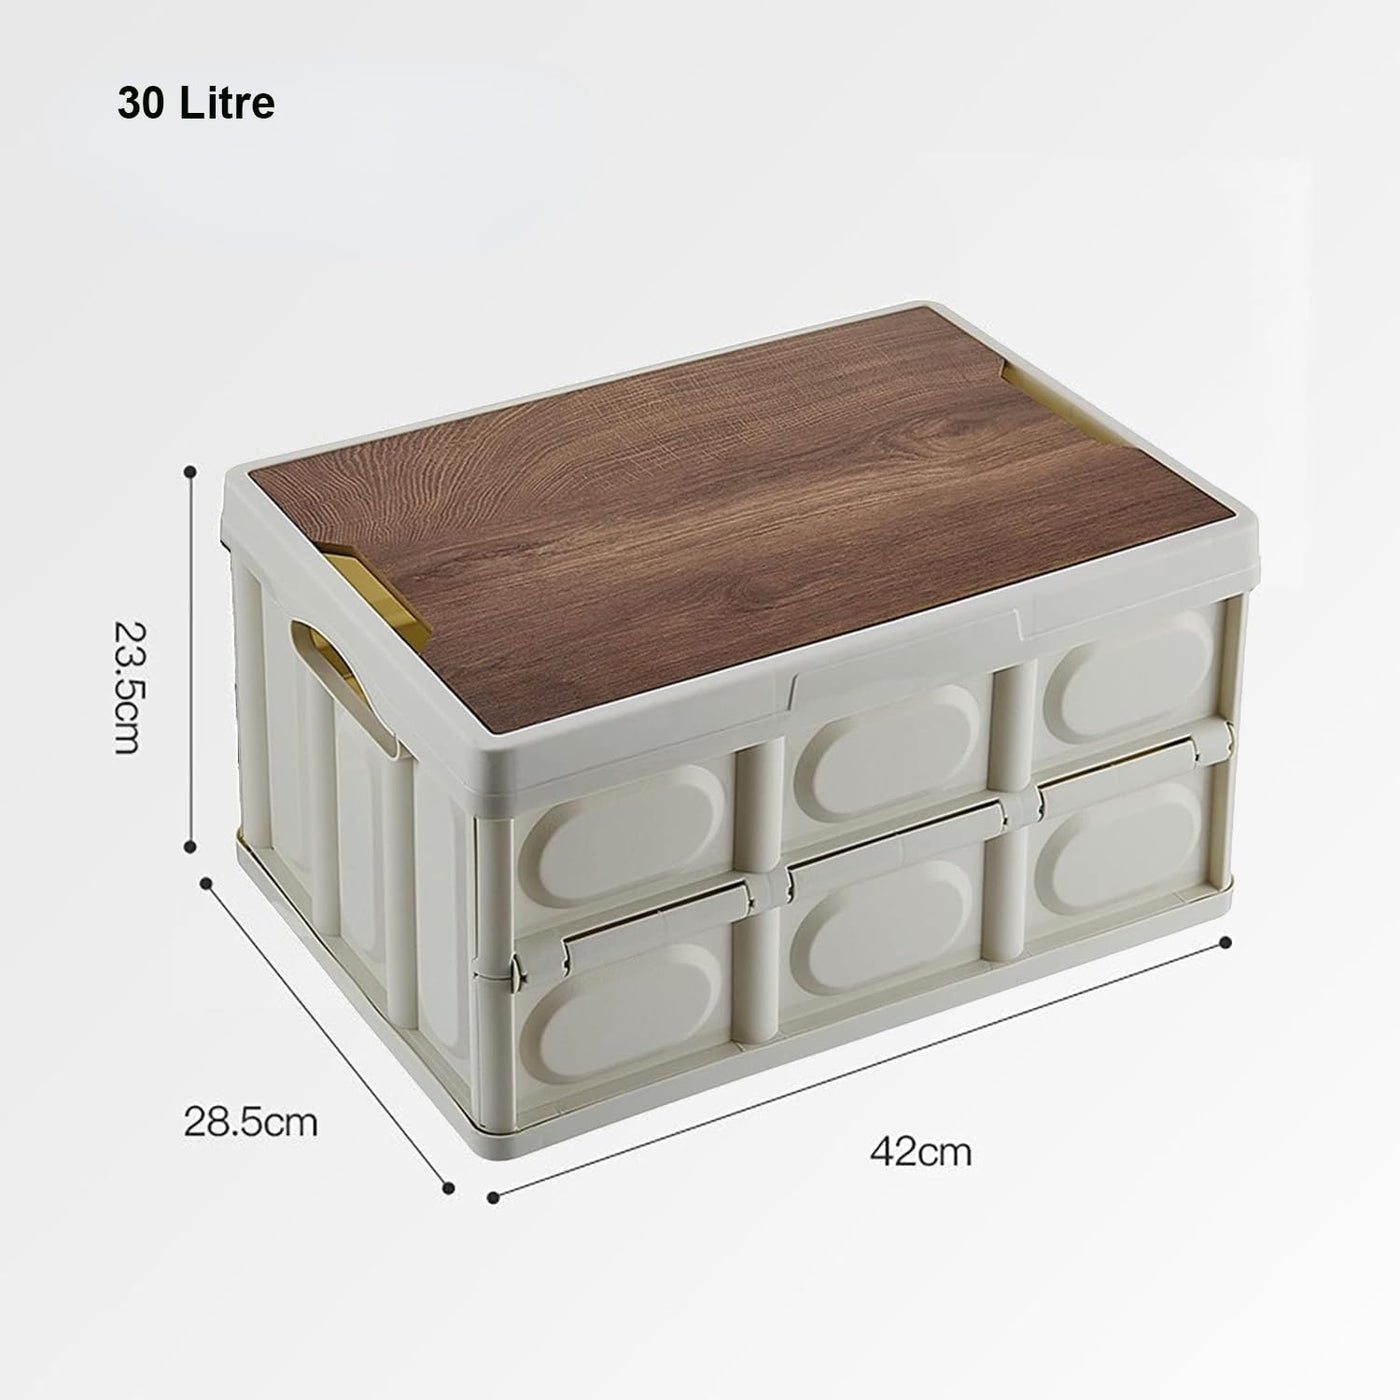 Folding Storage Bins with Wood Lid Storage Container - (30Litre, White)